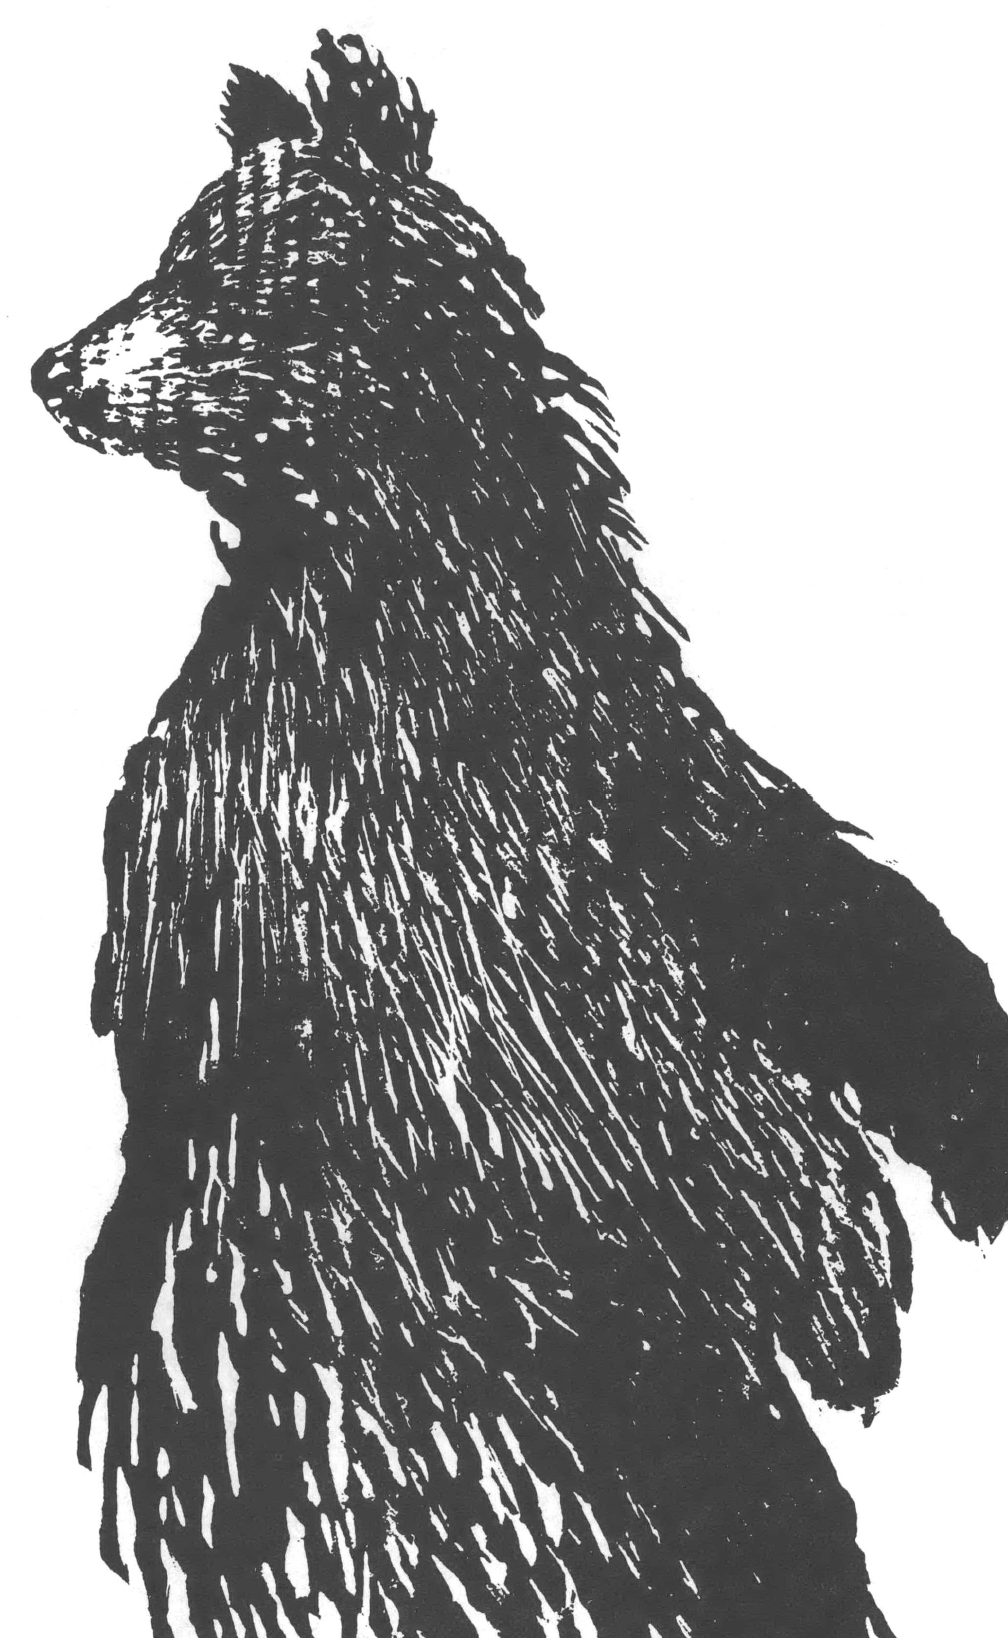 Black and white drawing of bear standing on hind legs and looking behind 